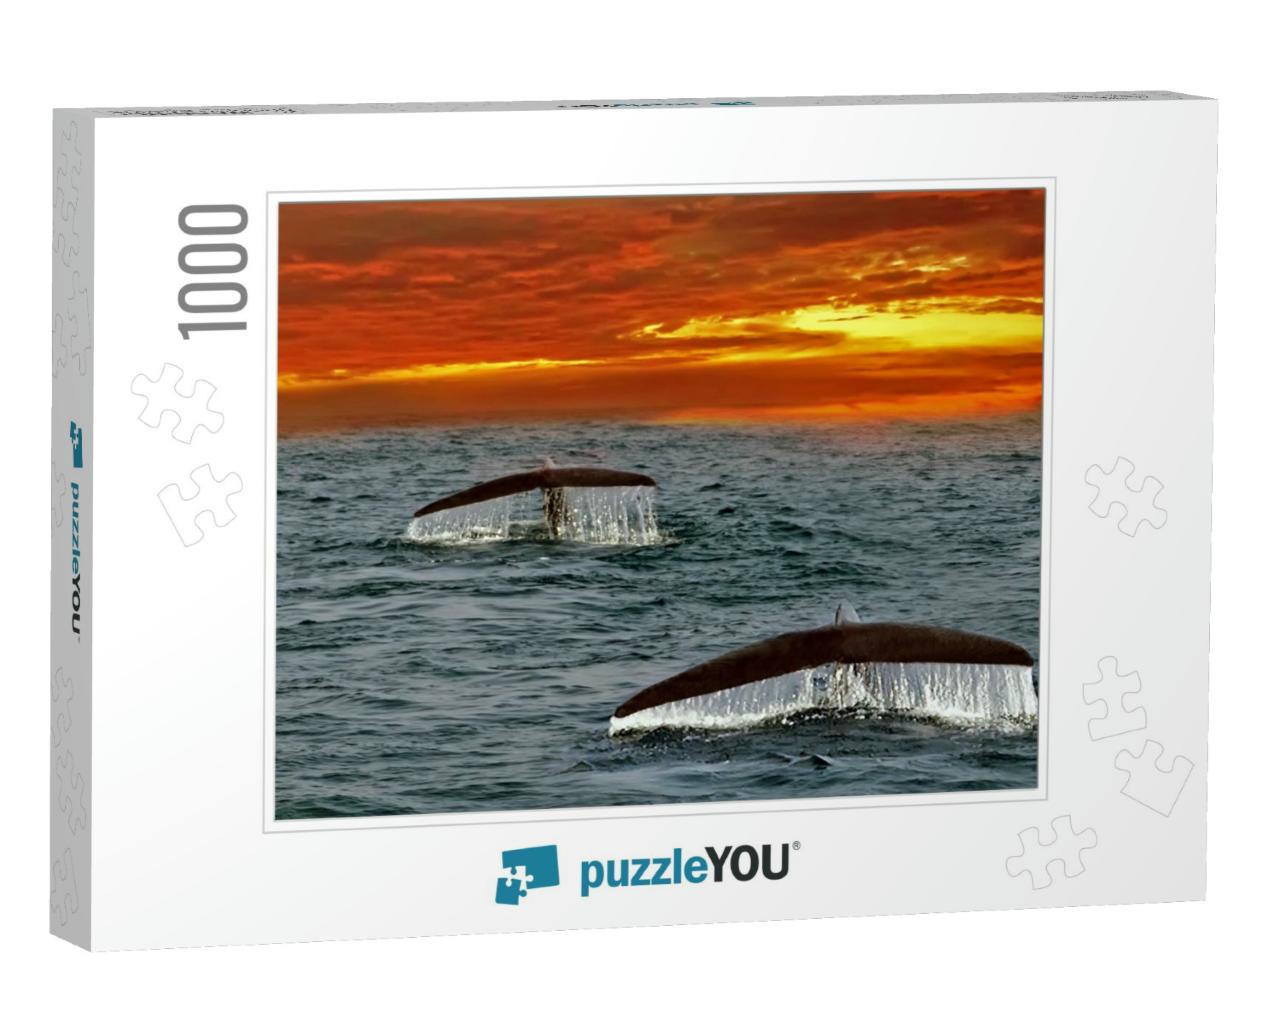 Whales Tails. Mirissa, Sri Lanka. Blue Whale Underwater I... Jigsaw Puzzle with 1000 pieces